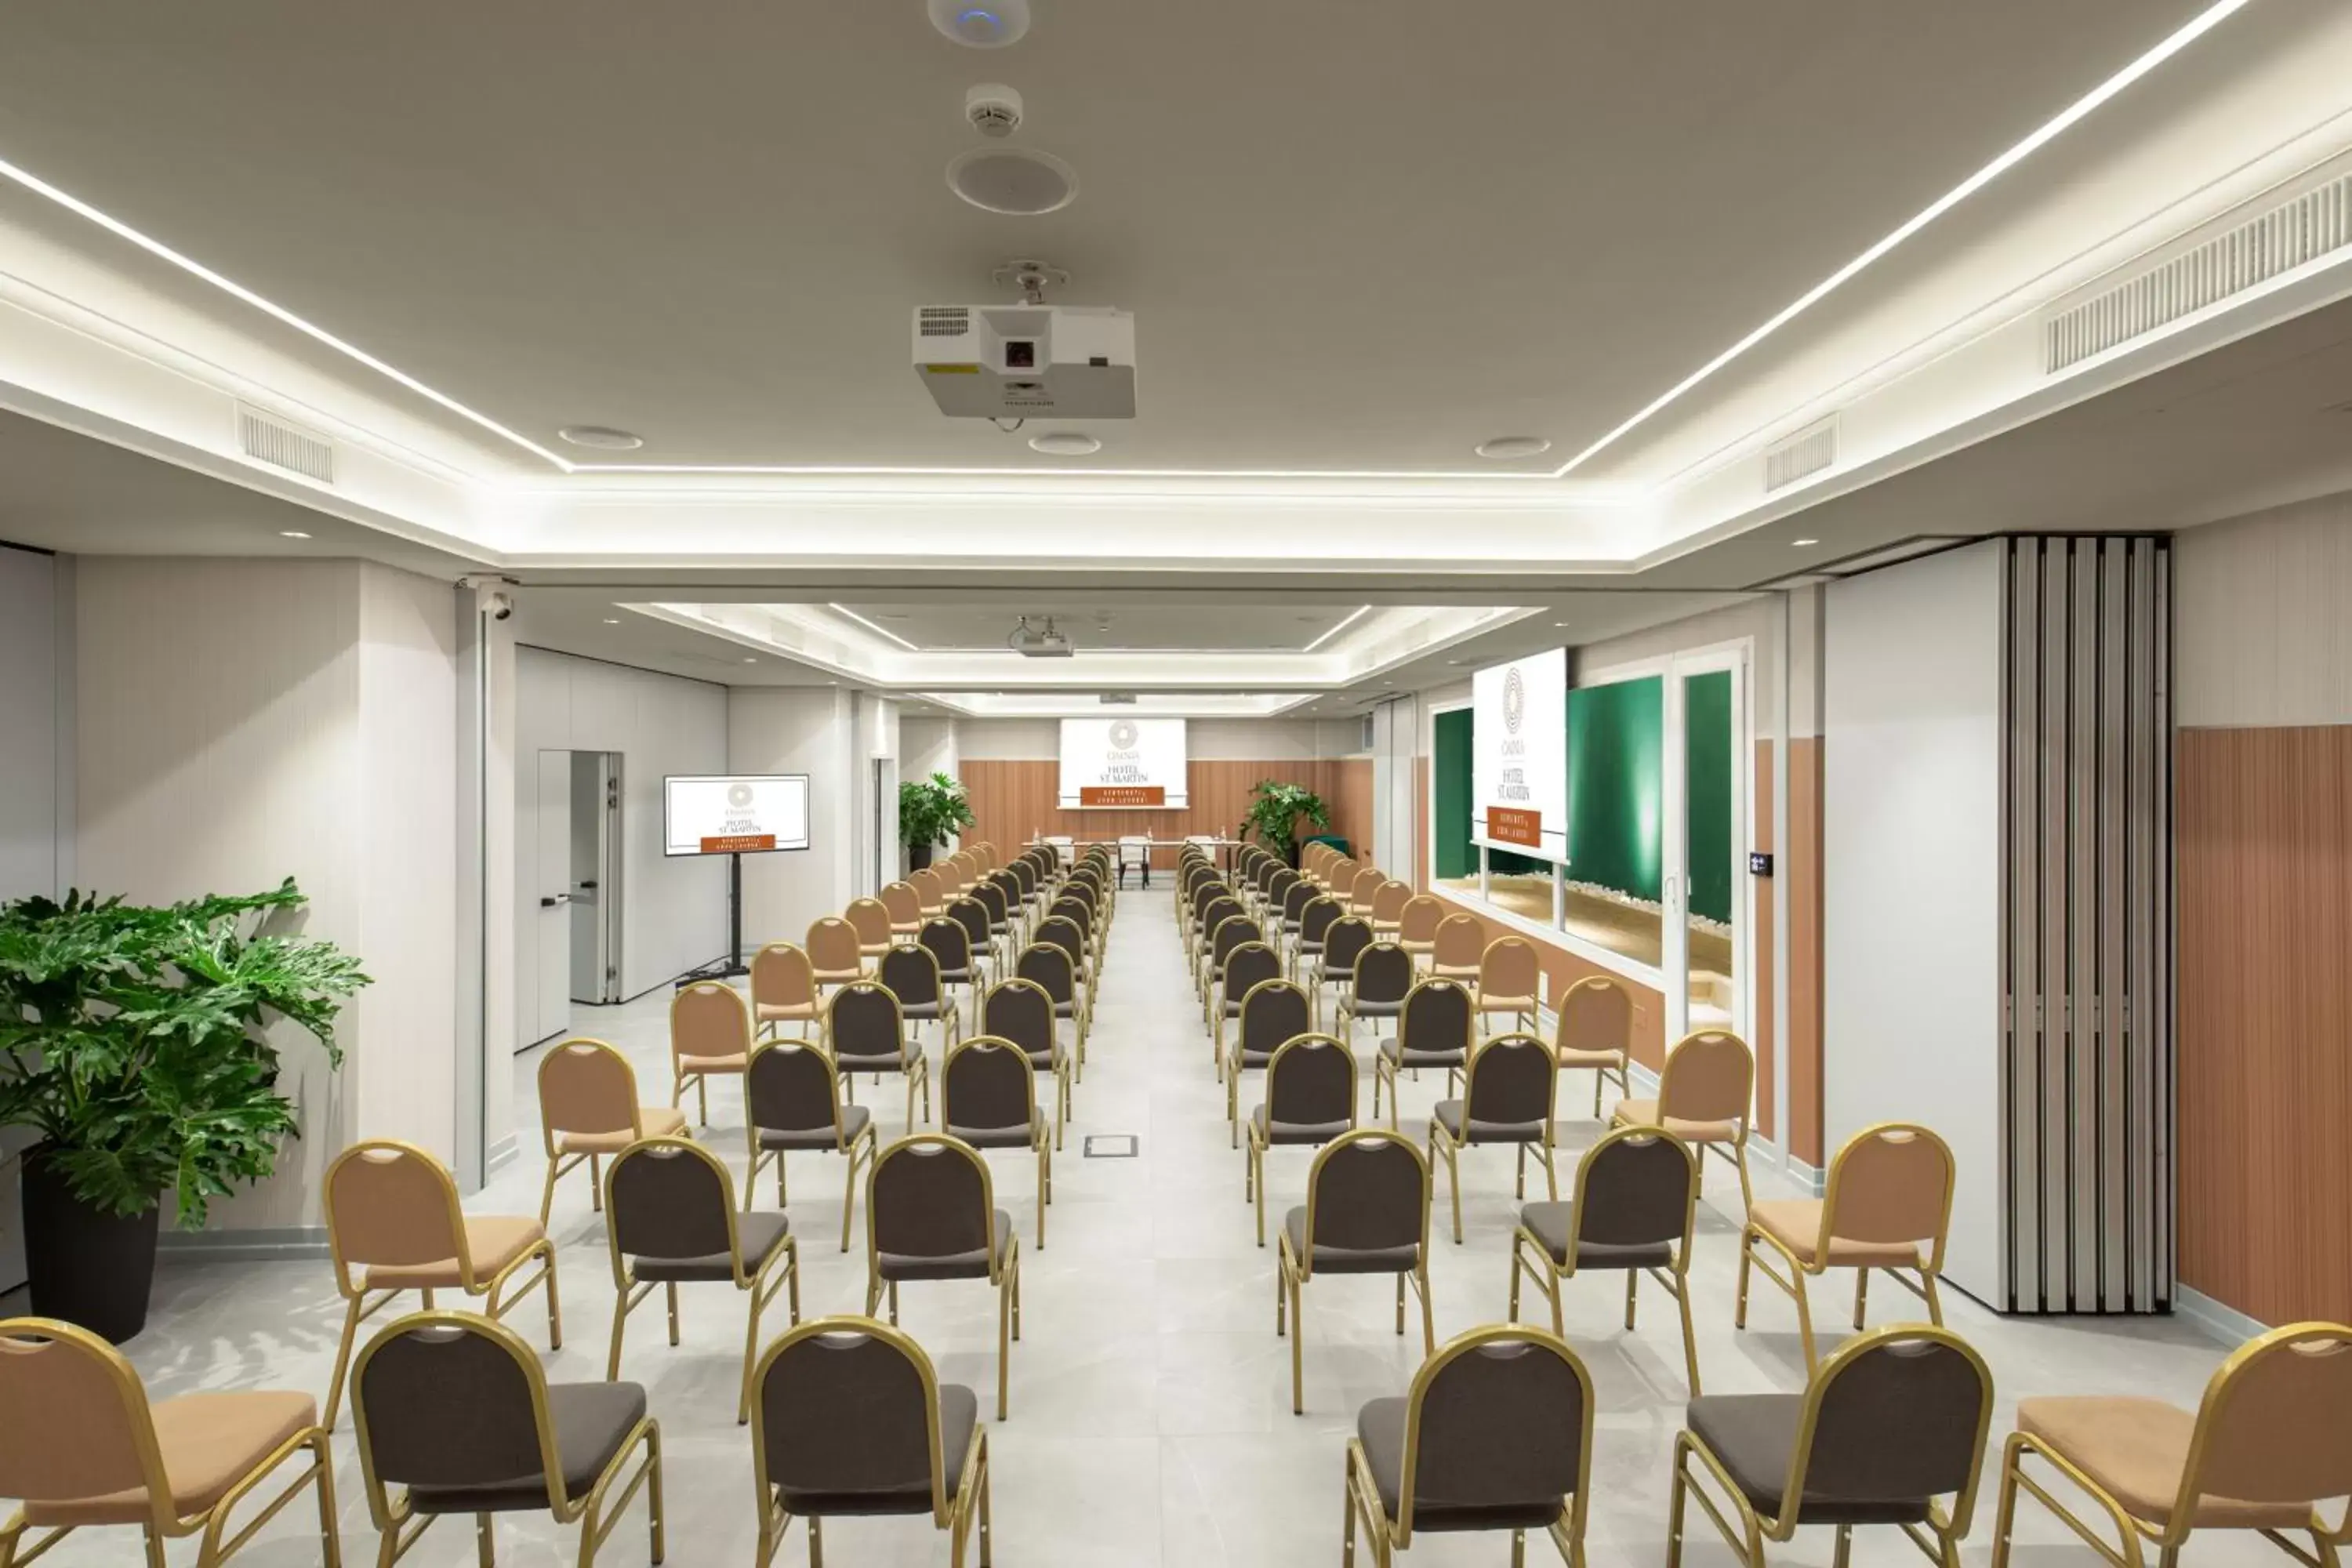 Meeting/conference room in Hotel St Martin by OMNIA hotels